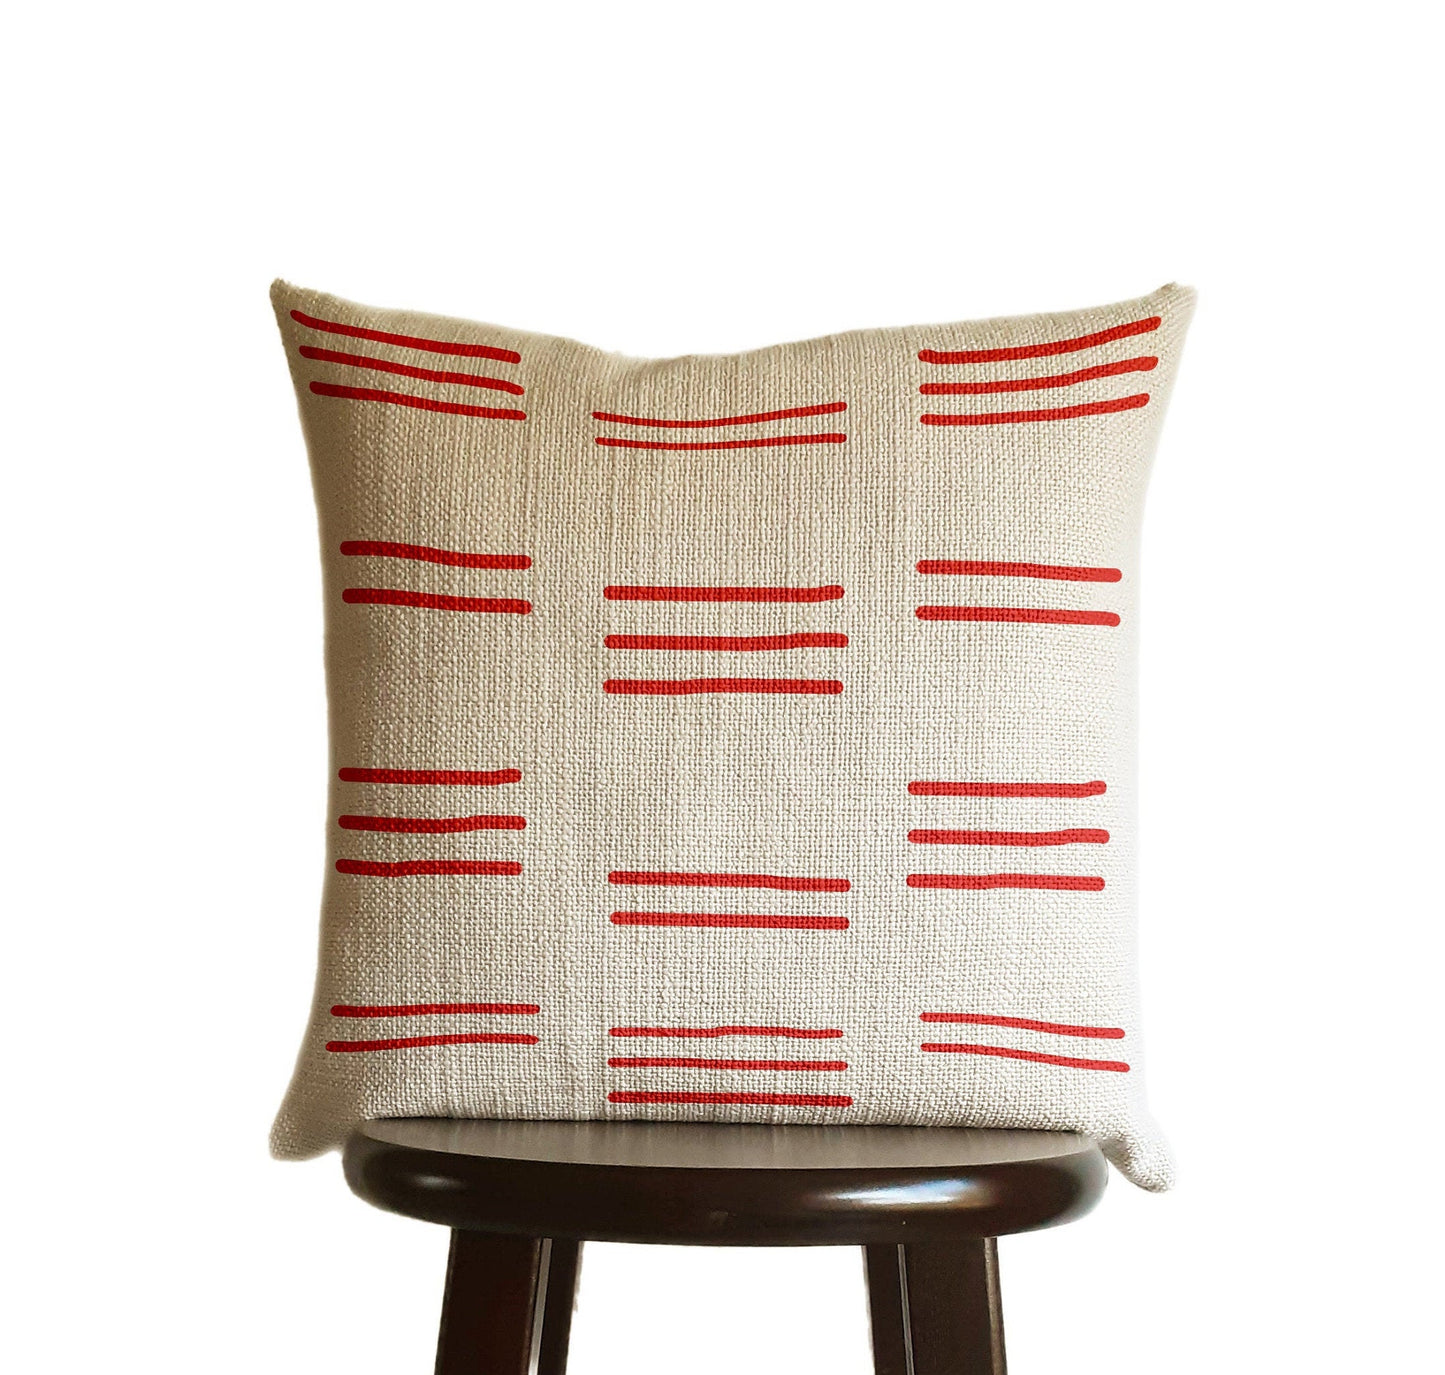 Bright Scarlet Red Pillow Cover, Tribal Urban Ethnic Square 18x18 in Natural Oatmeal Color Textured Woven Fabric in Modern Boho Home Decor